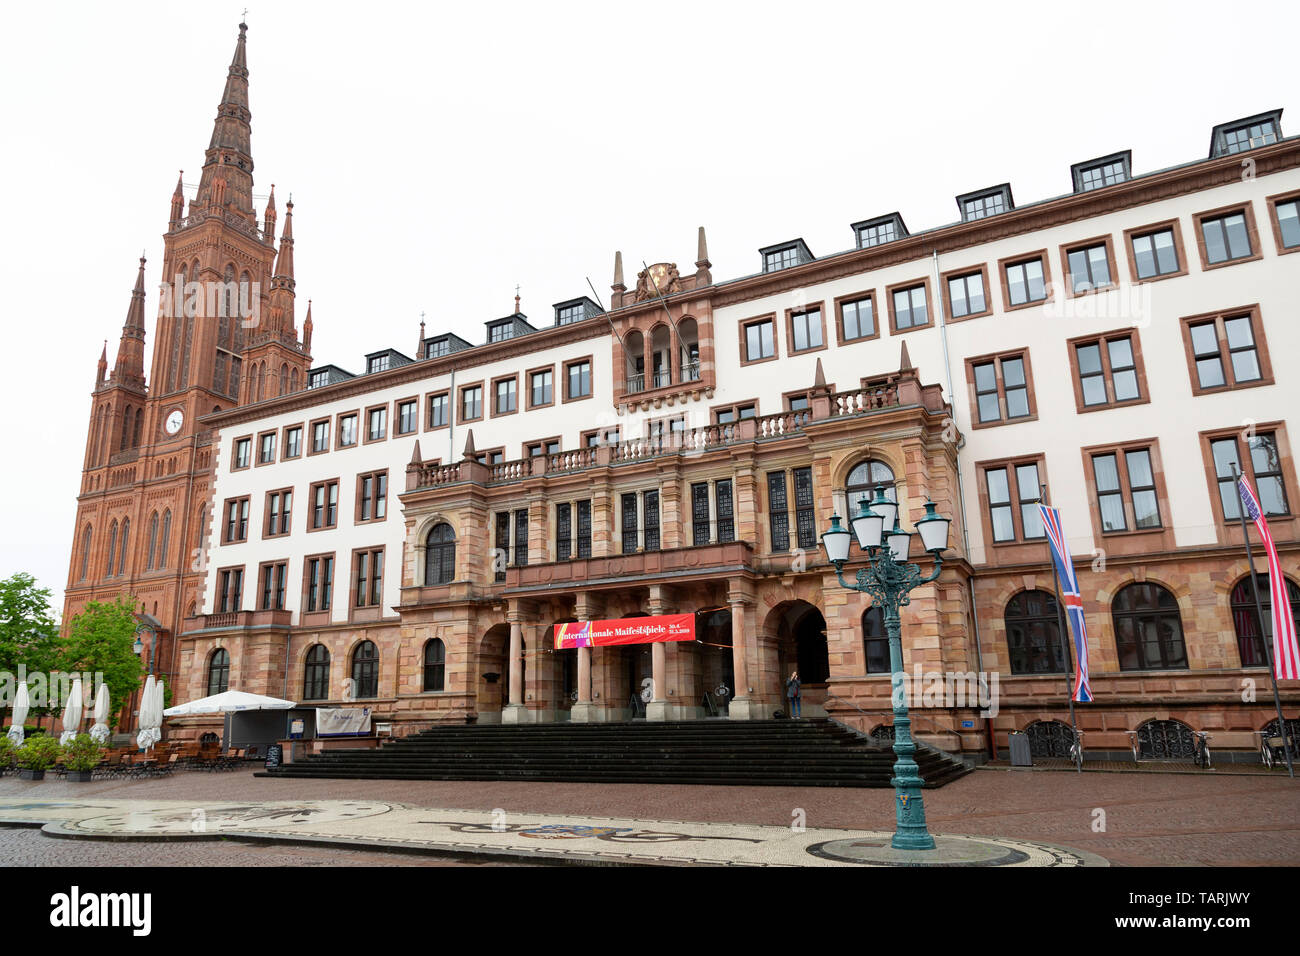 The City Hall (Rathaus) in Wiesbaden, the state capital of Hesse, Germany. The municipal building stands by the Market Church (Marktkirche). Stock Photo